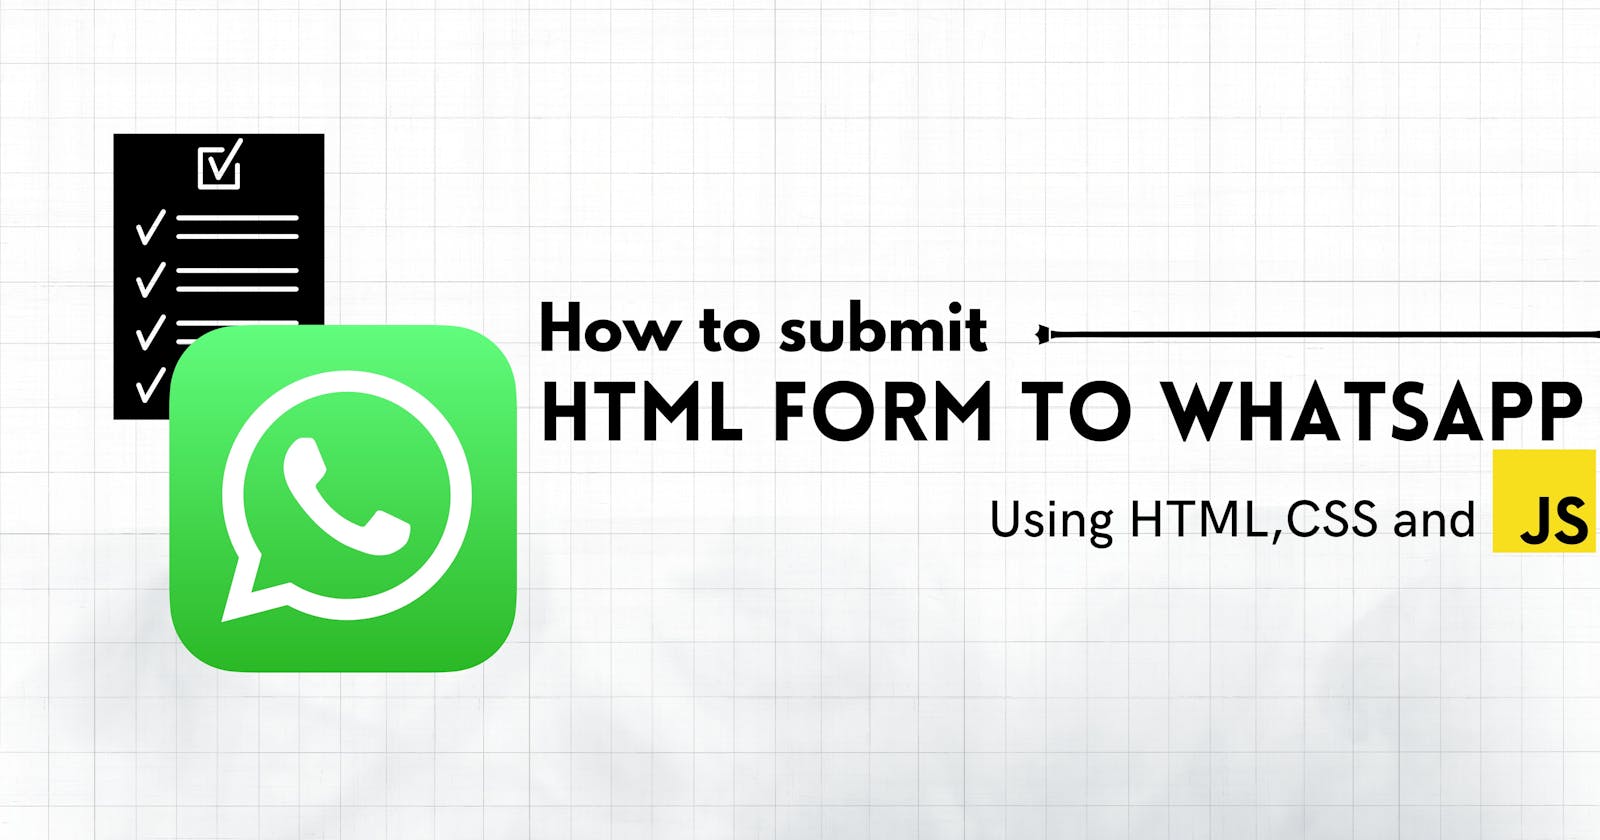 How to submit HTML Form to Whats App using JavaScript